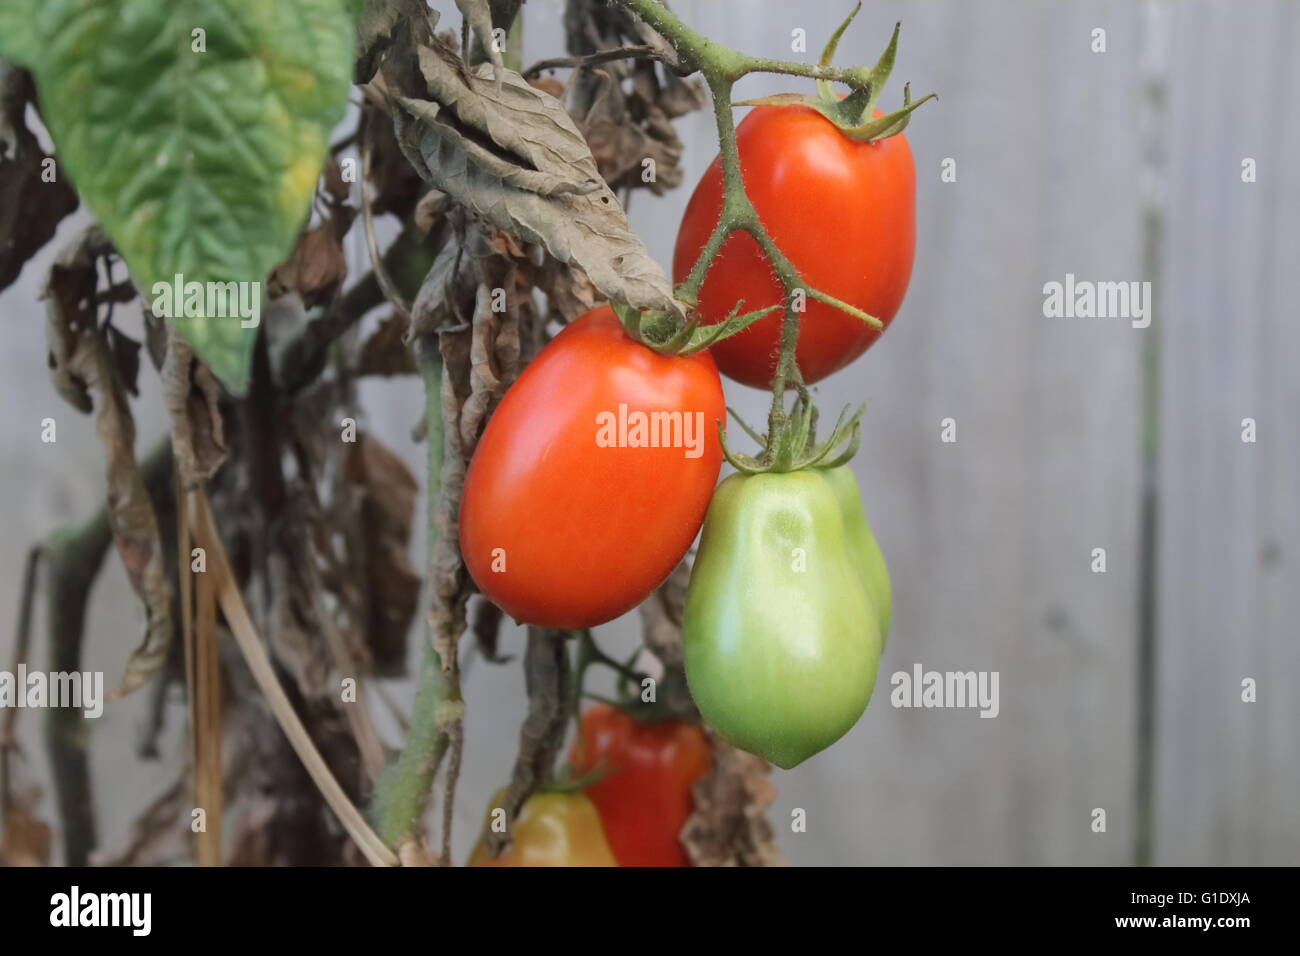 Tomato ready for harvest at a garden Stock Photo